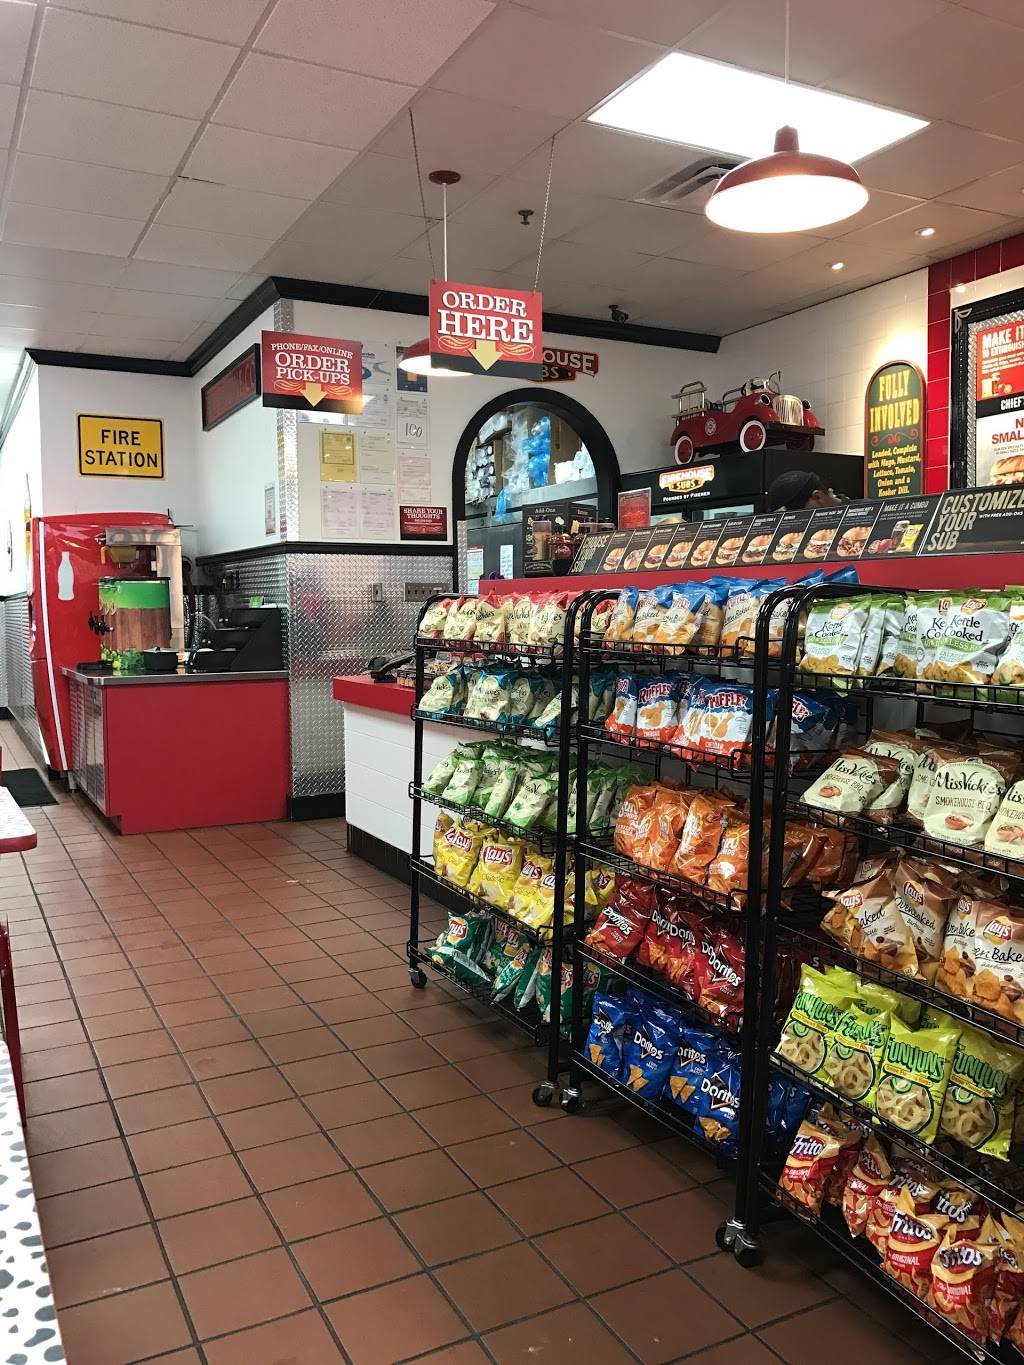 Firehouse Subs | meal delivery | 1483 Gadsden Hwy #1312, Birmingham, AL 35235, USA | 2056611444 OR +1 205-661-1444